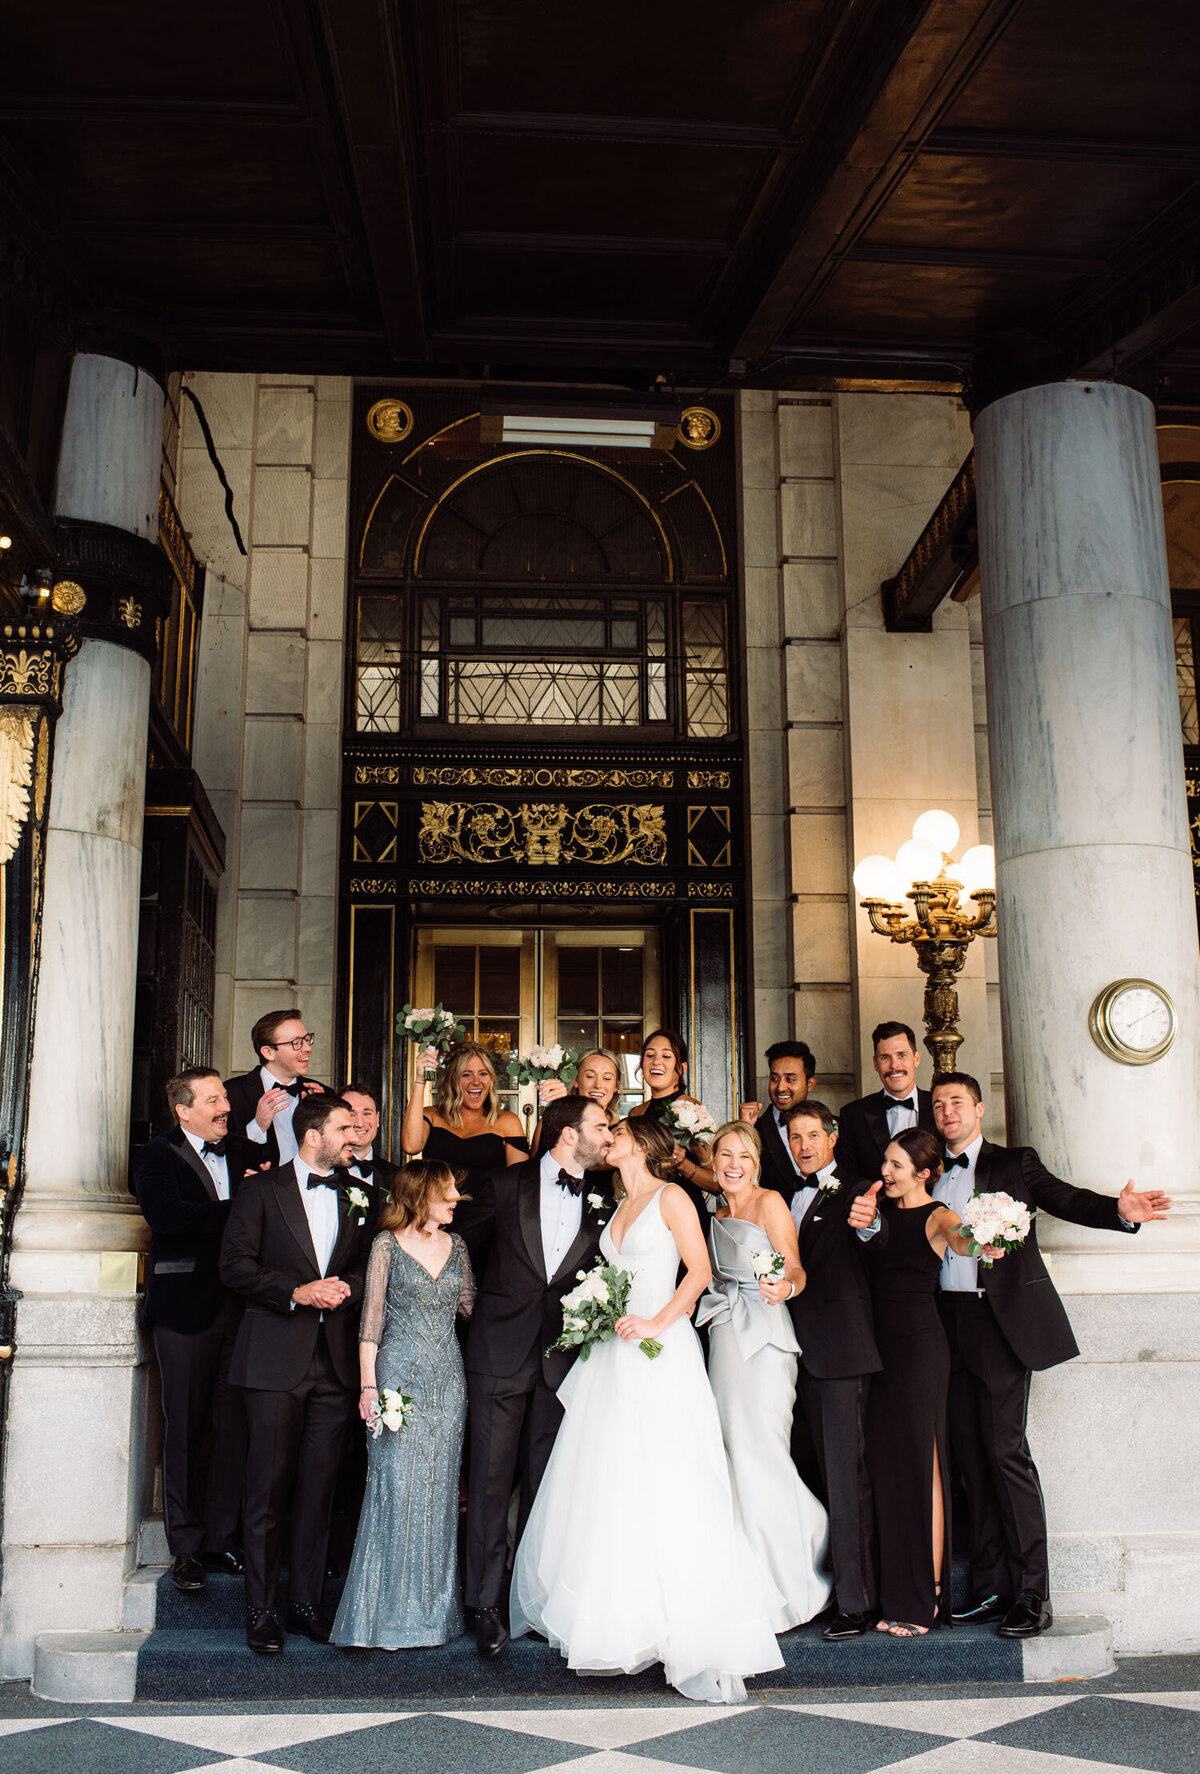 Central Park Boat House, The Plaza Hotel, Manhattan NYC Wedding, Nichole Tippin Photography -4